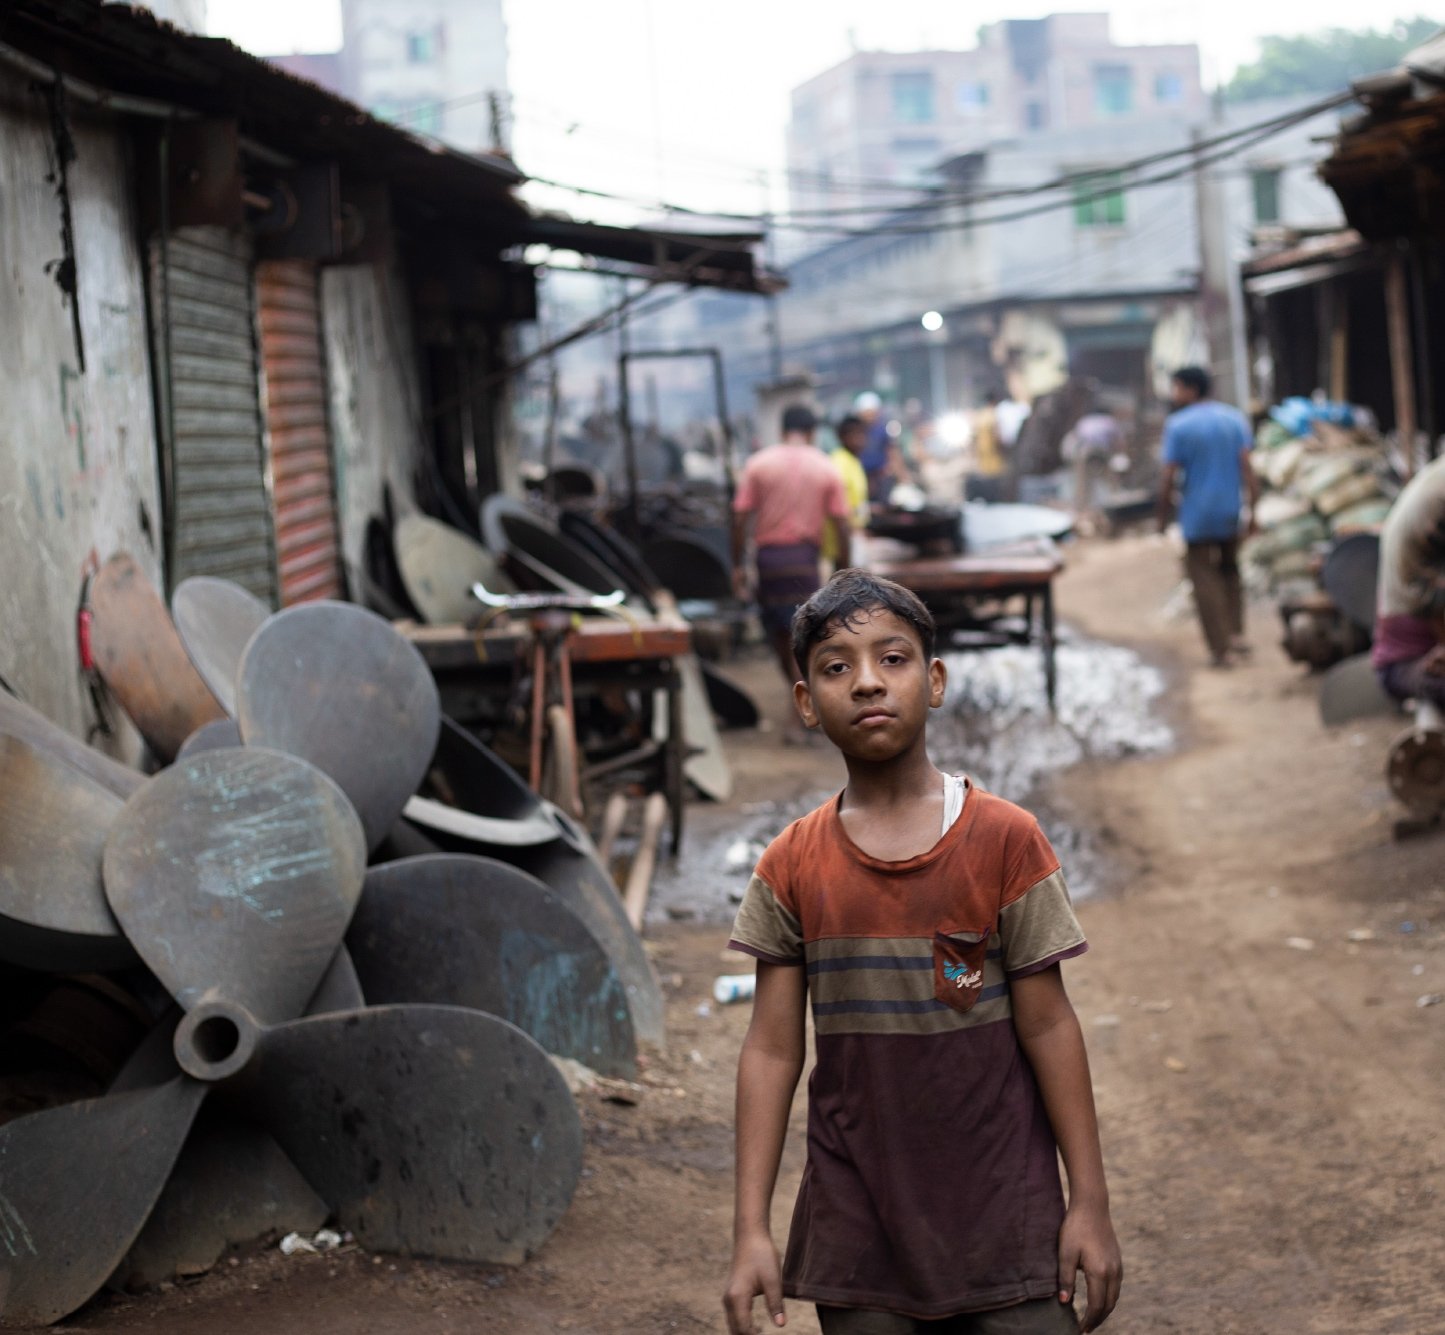 Bangladesh child looking at camera in an industrial area